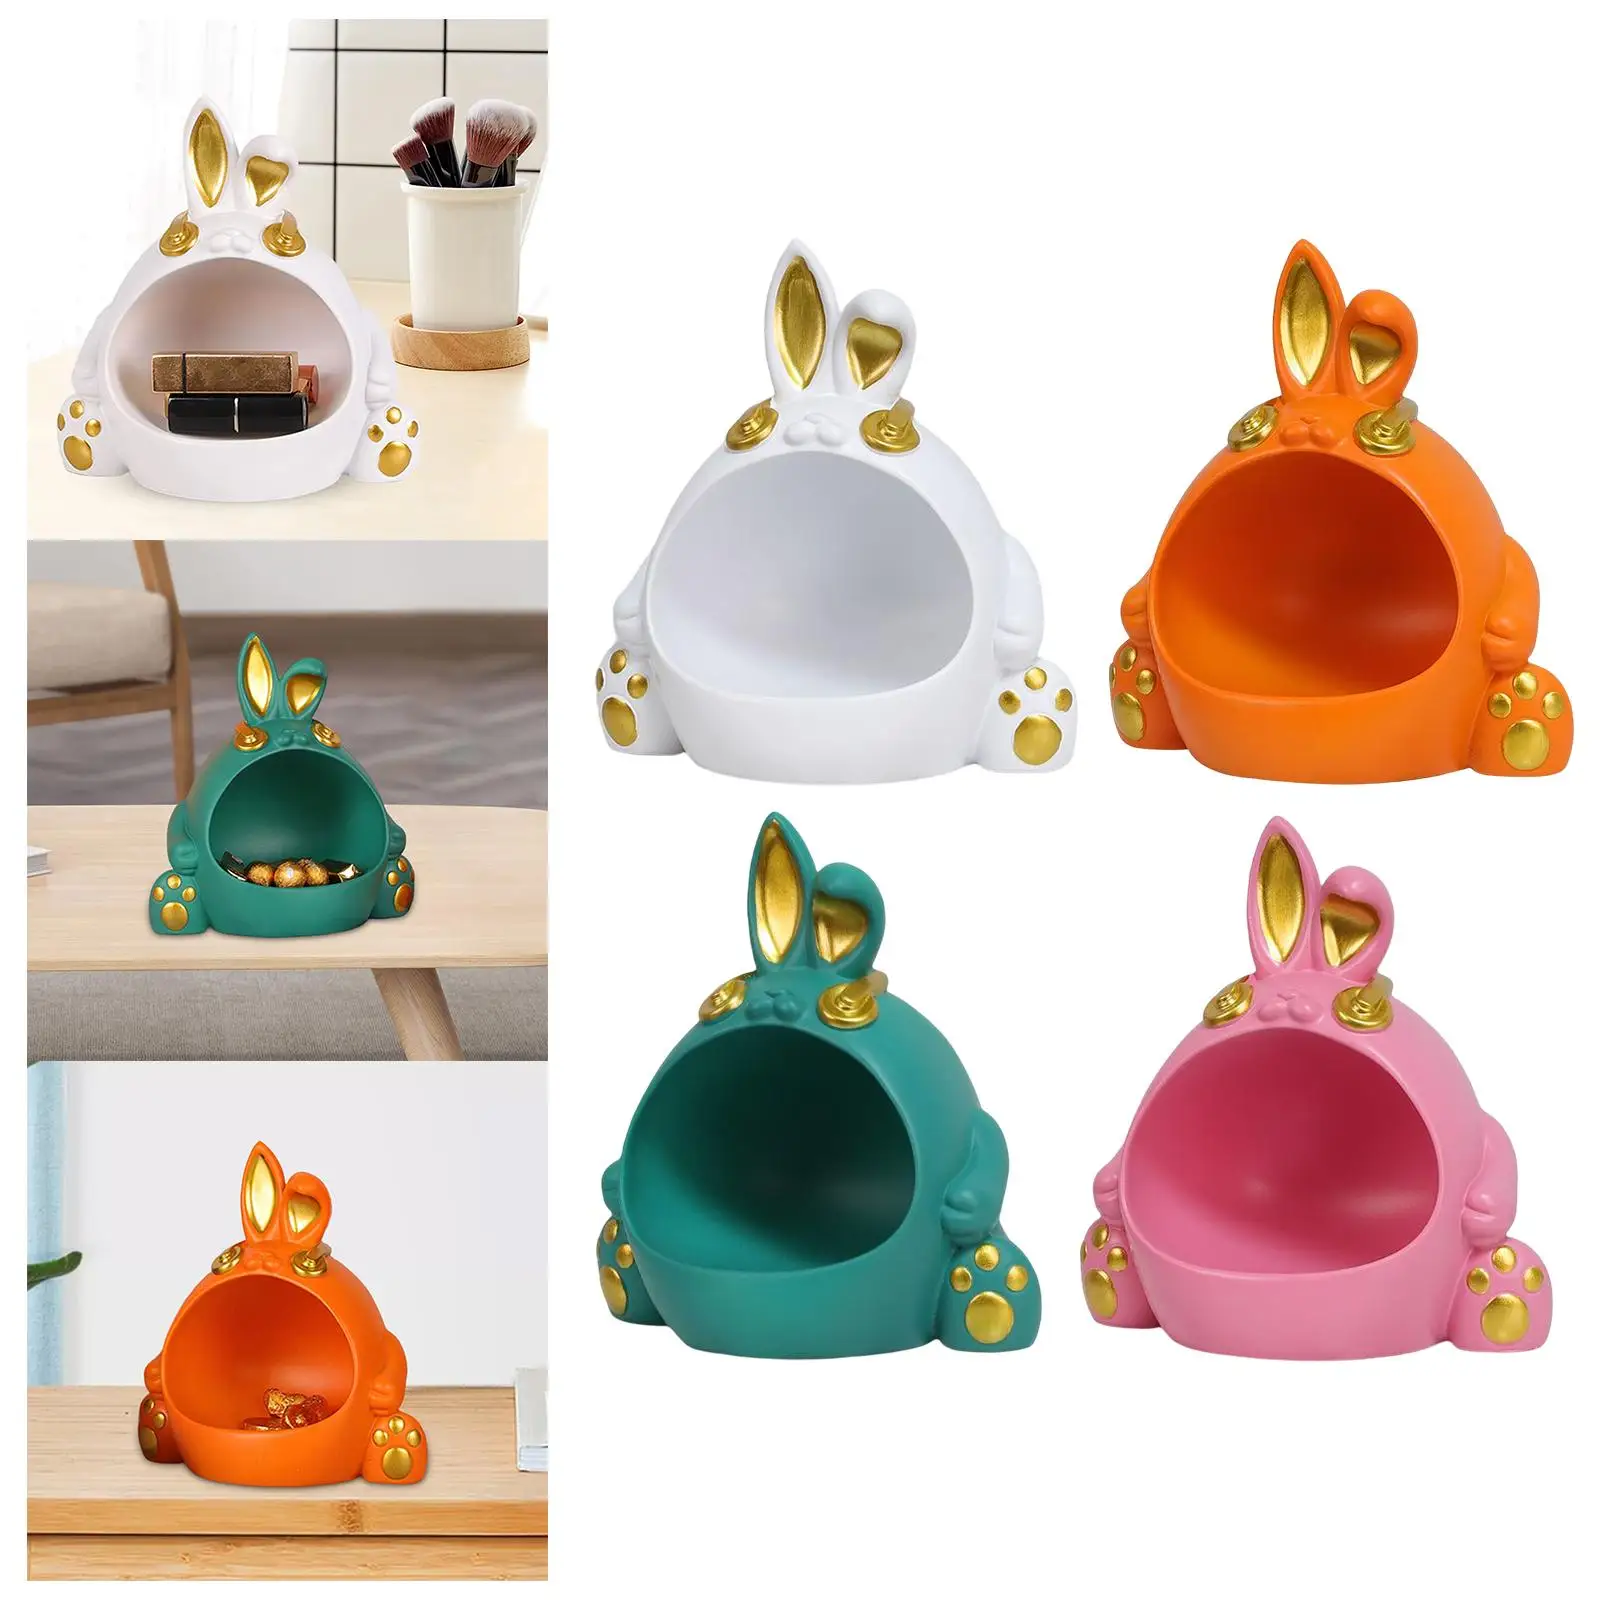 Resin Storage boxes bunny Figurine Cute Animal for Bathroom Crafts Living Room Home Decor